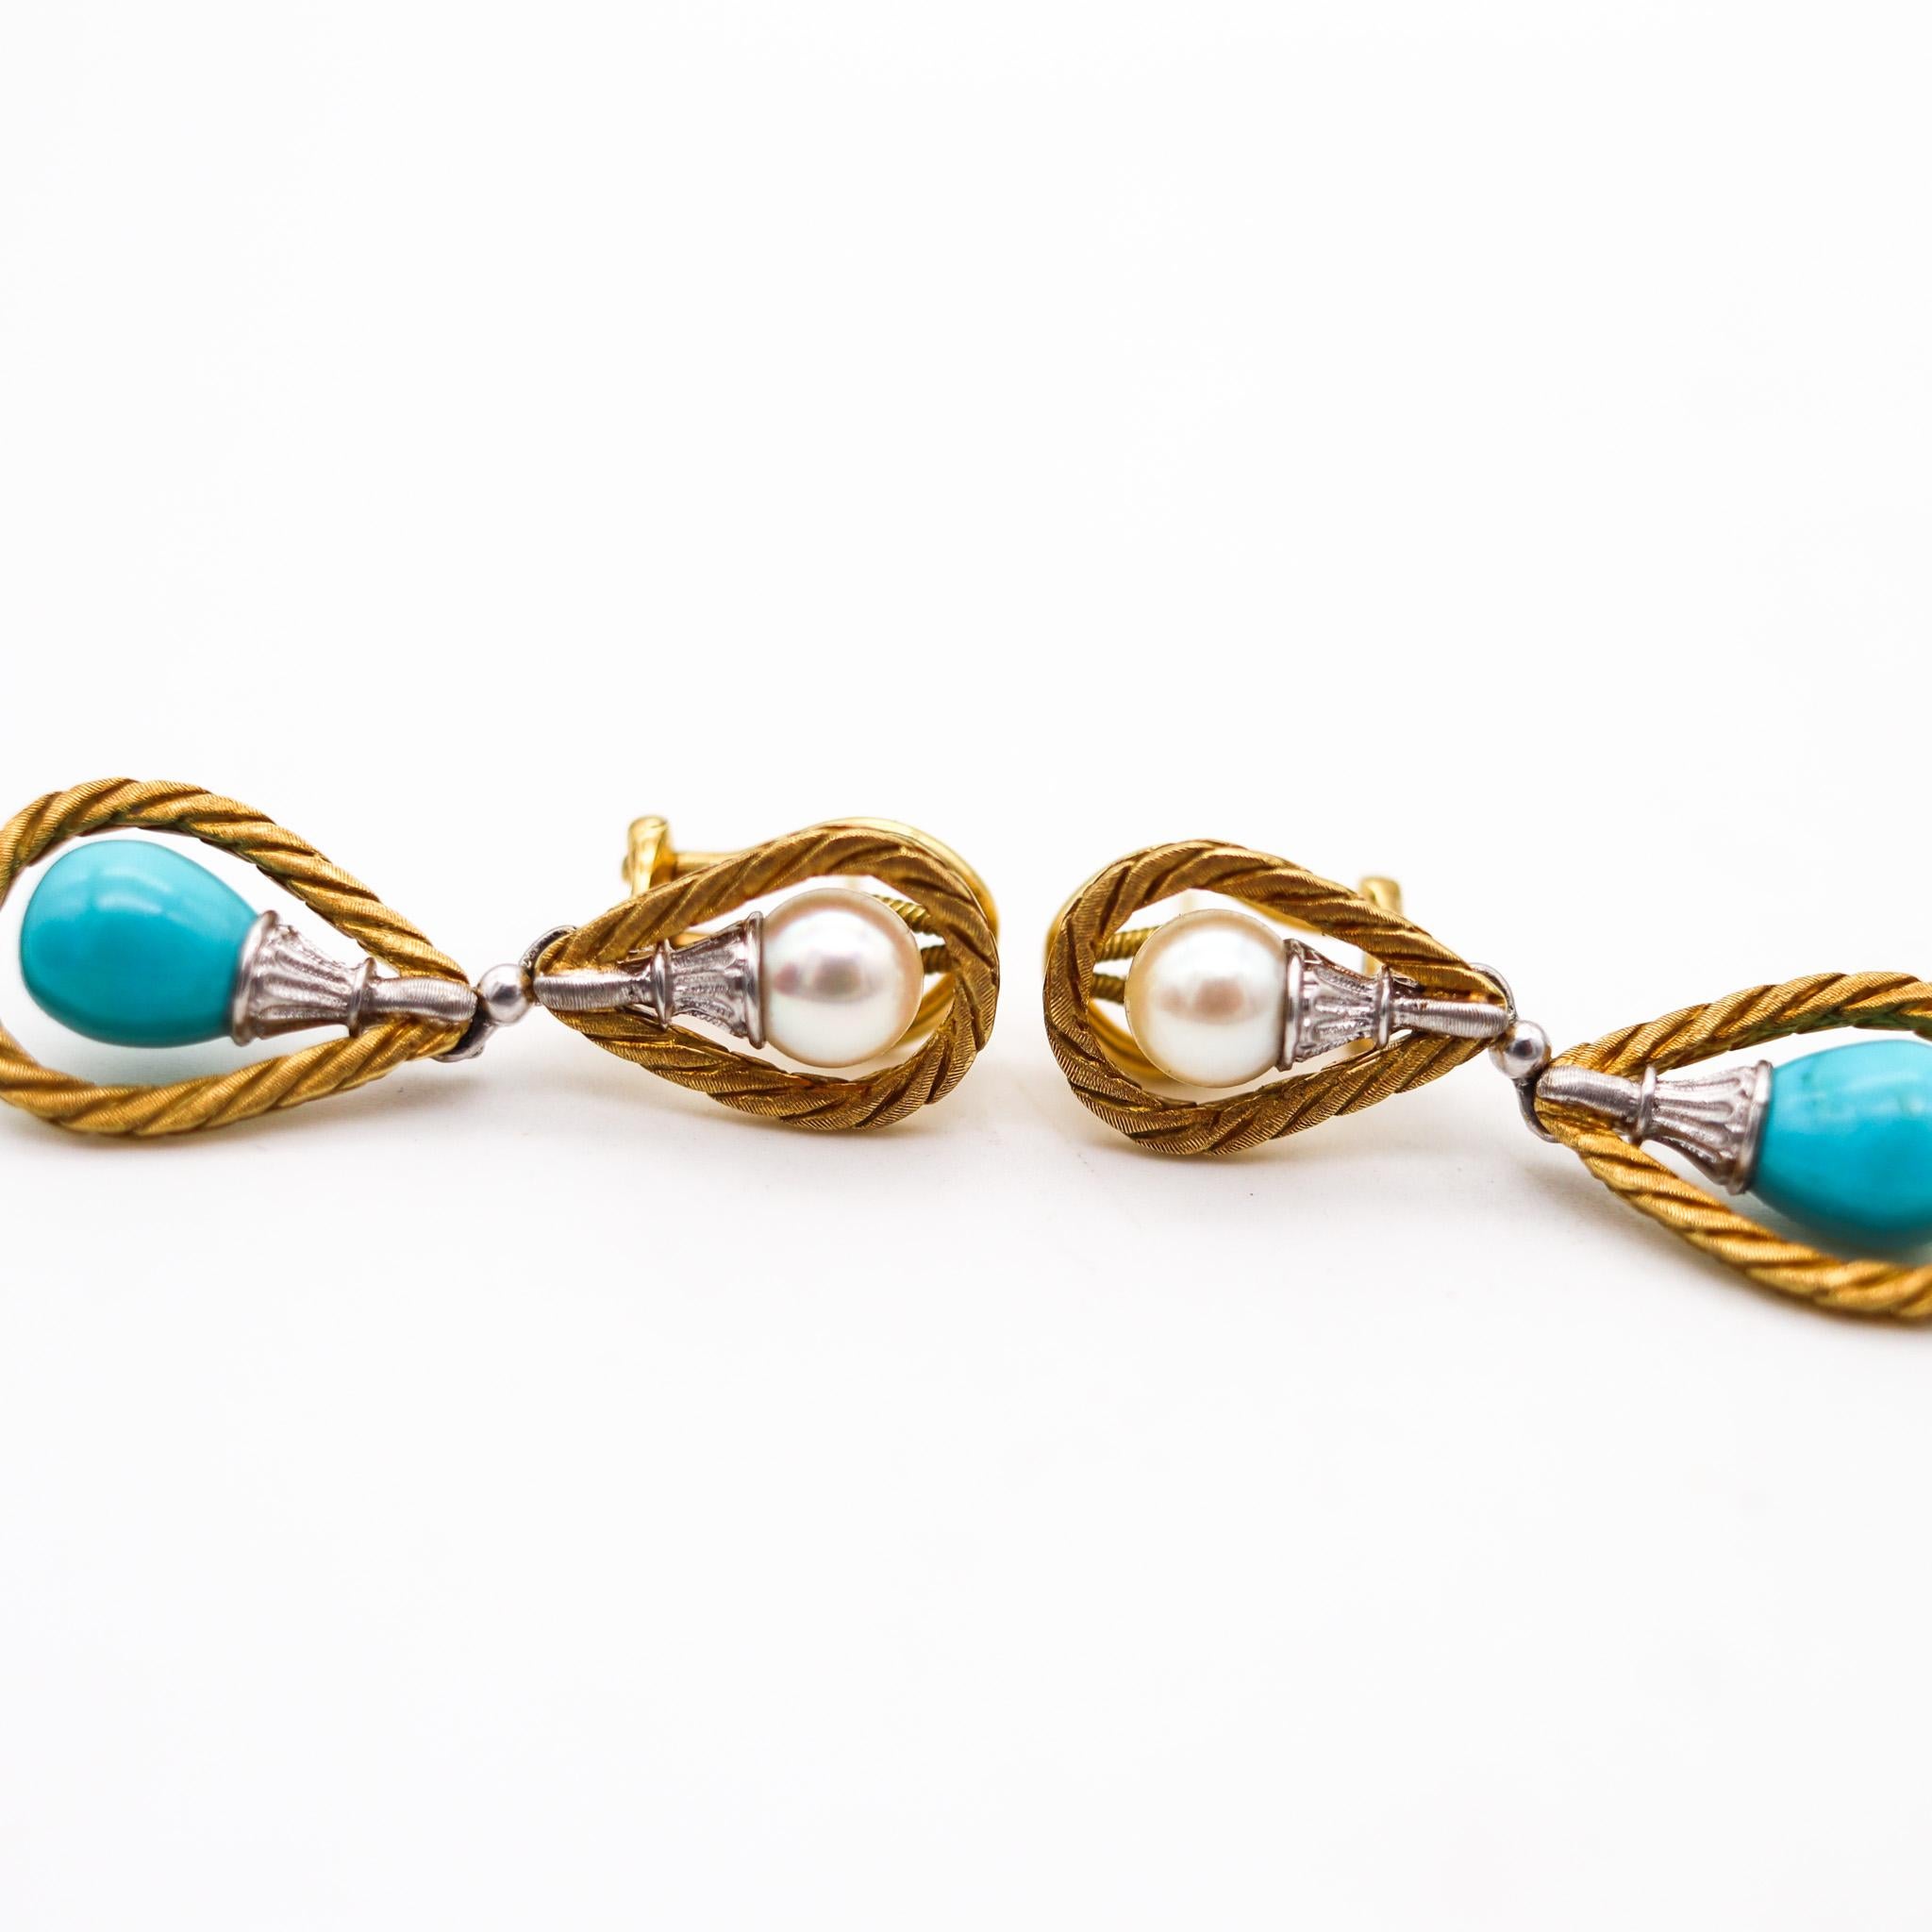 Briolette Cut Mario Buccellati 1970 Dangle Earrings In 18Kt Gold With Turquoises and Pearls For Sale